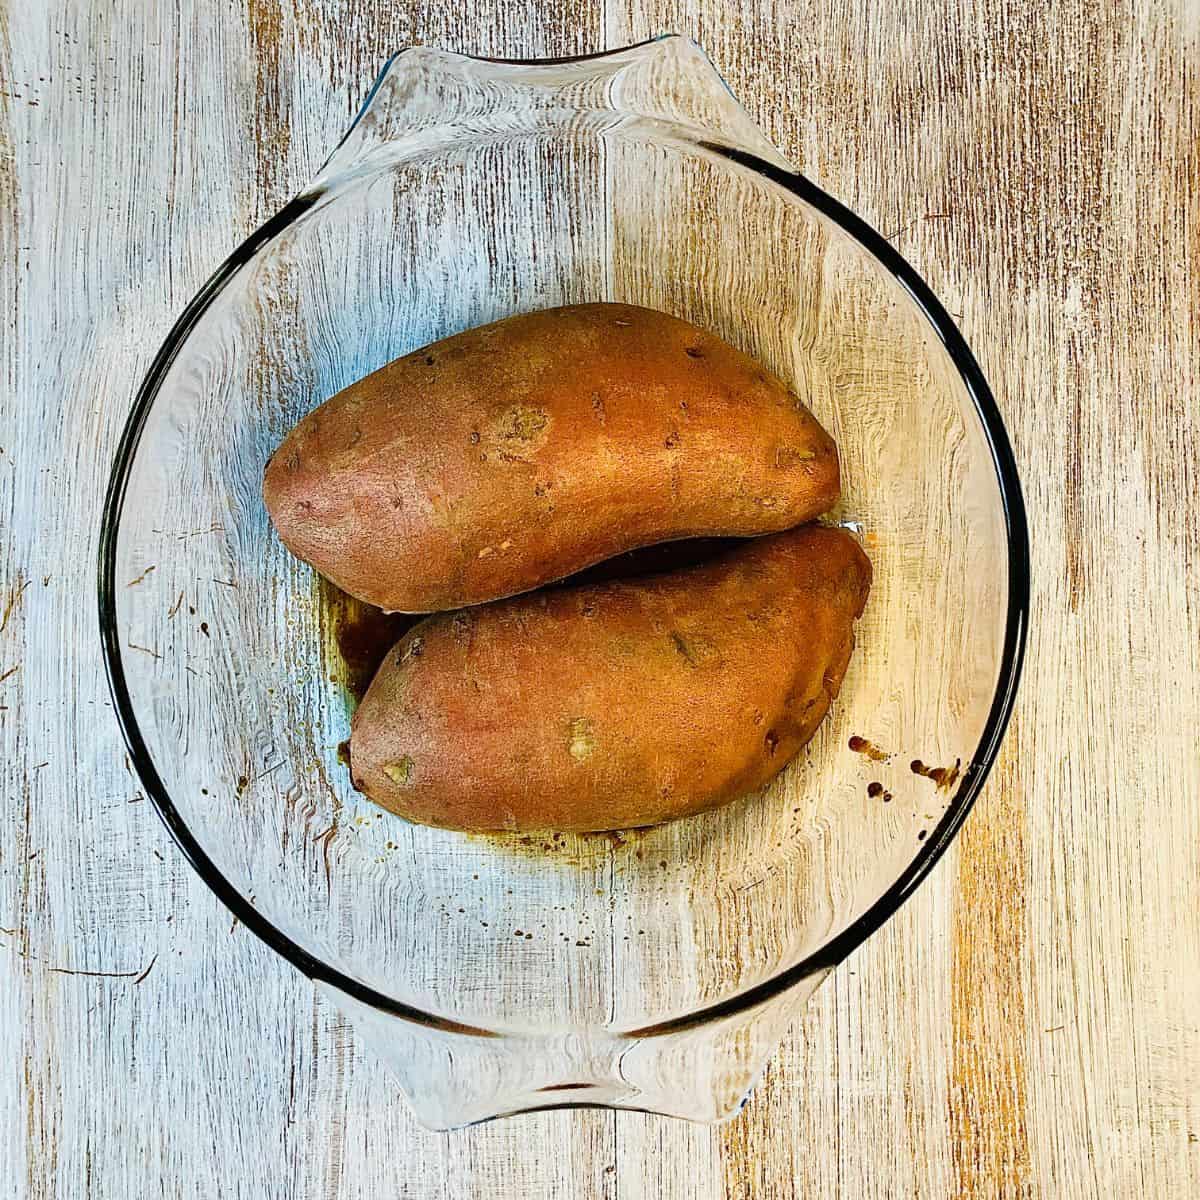 A glass bowl containing two sweet potato halves face down in marinade.